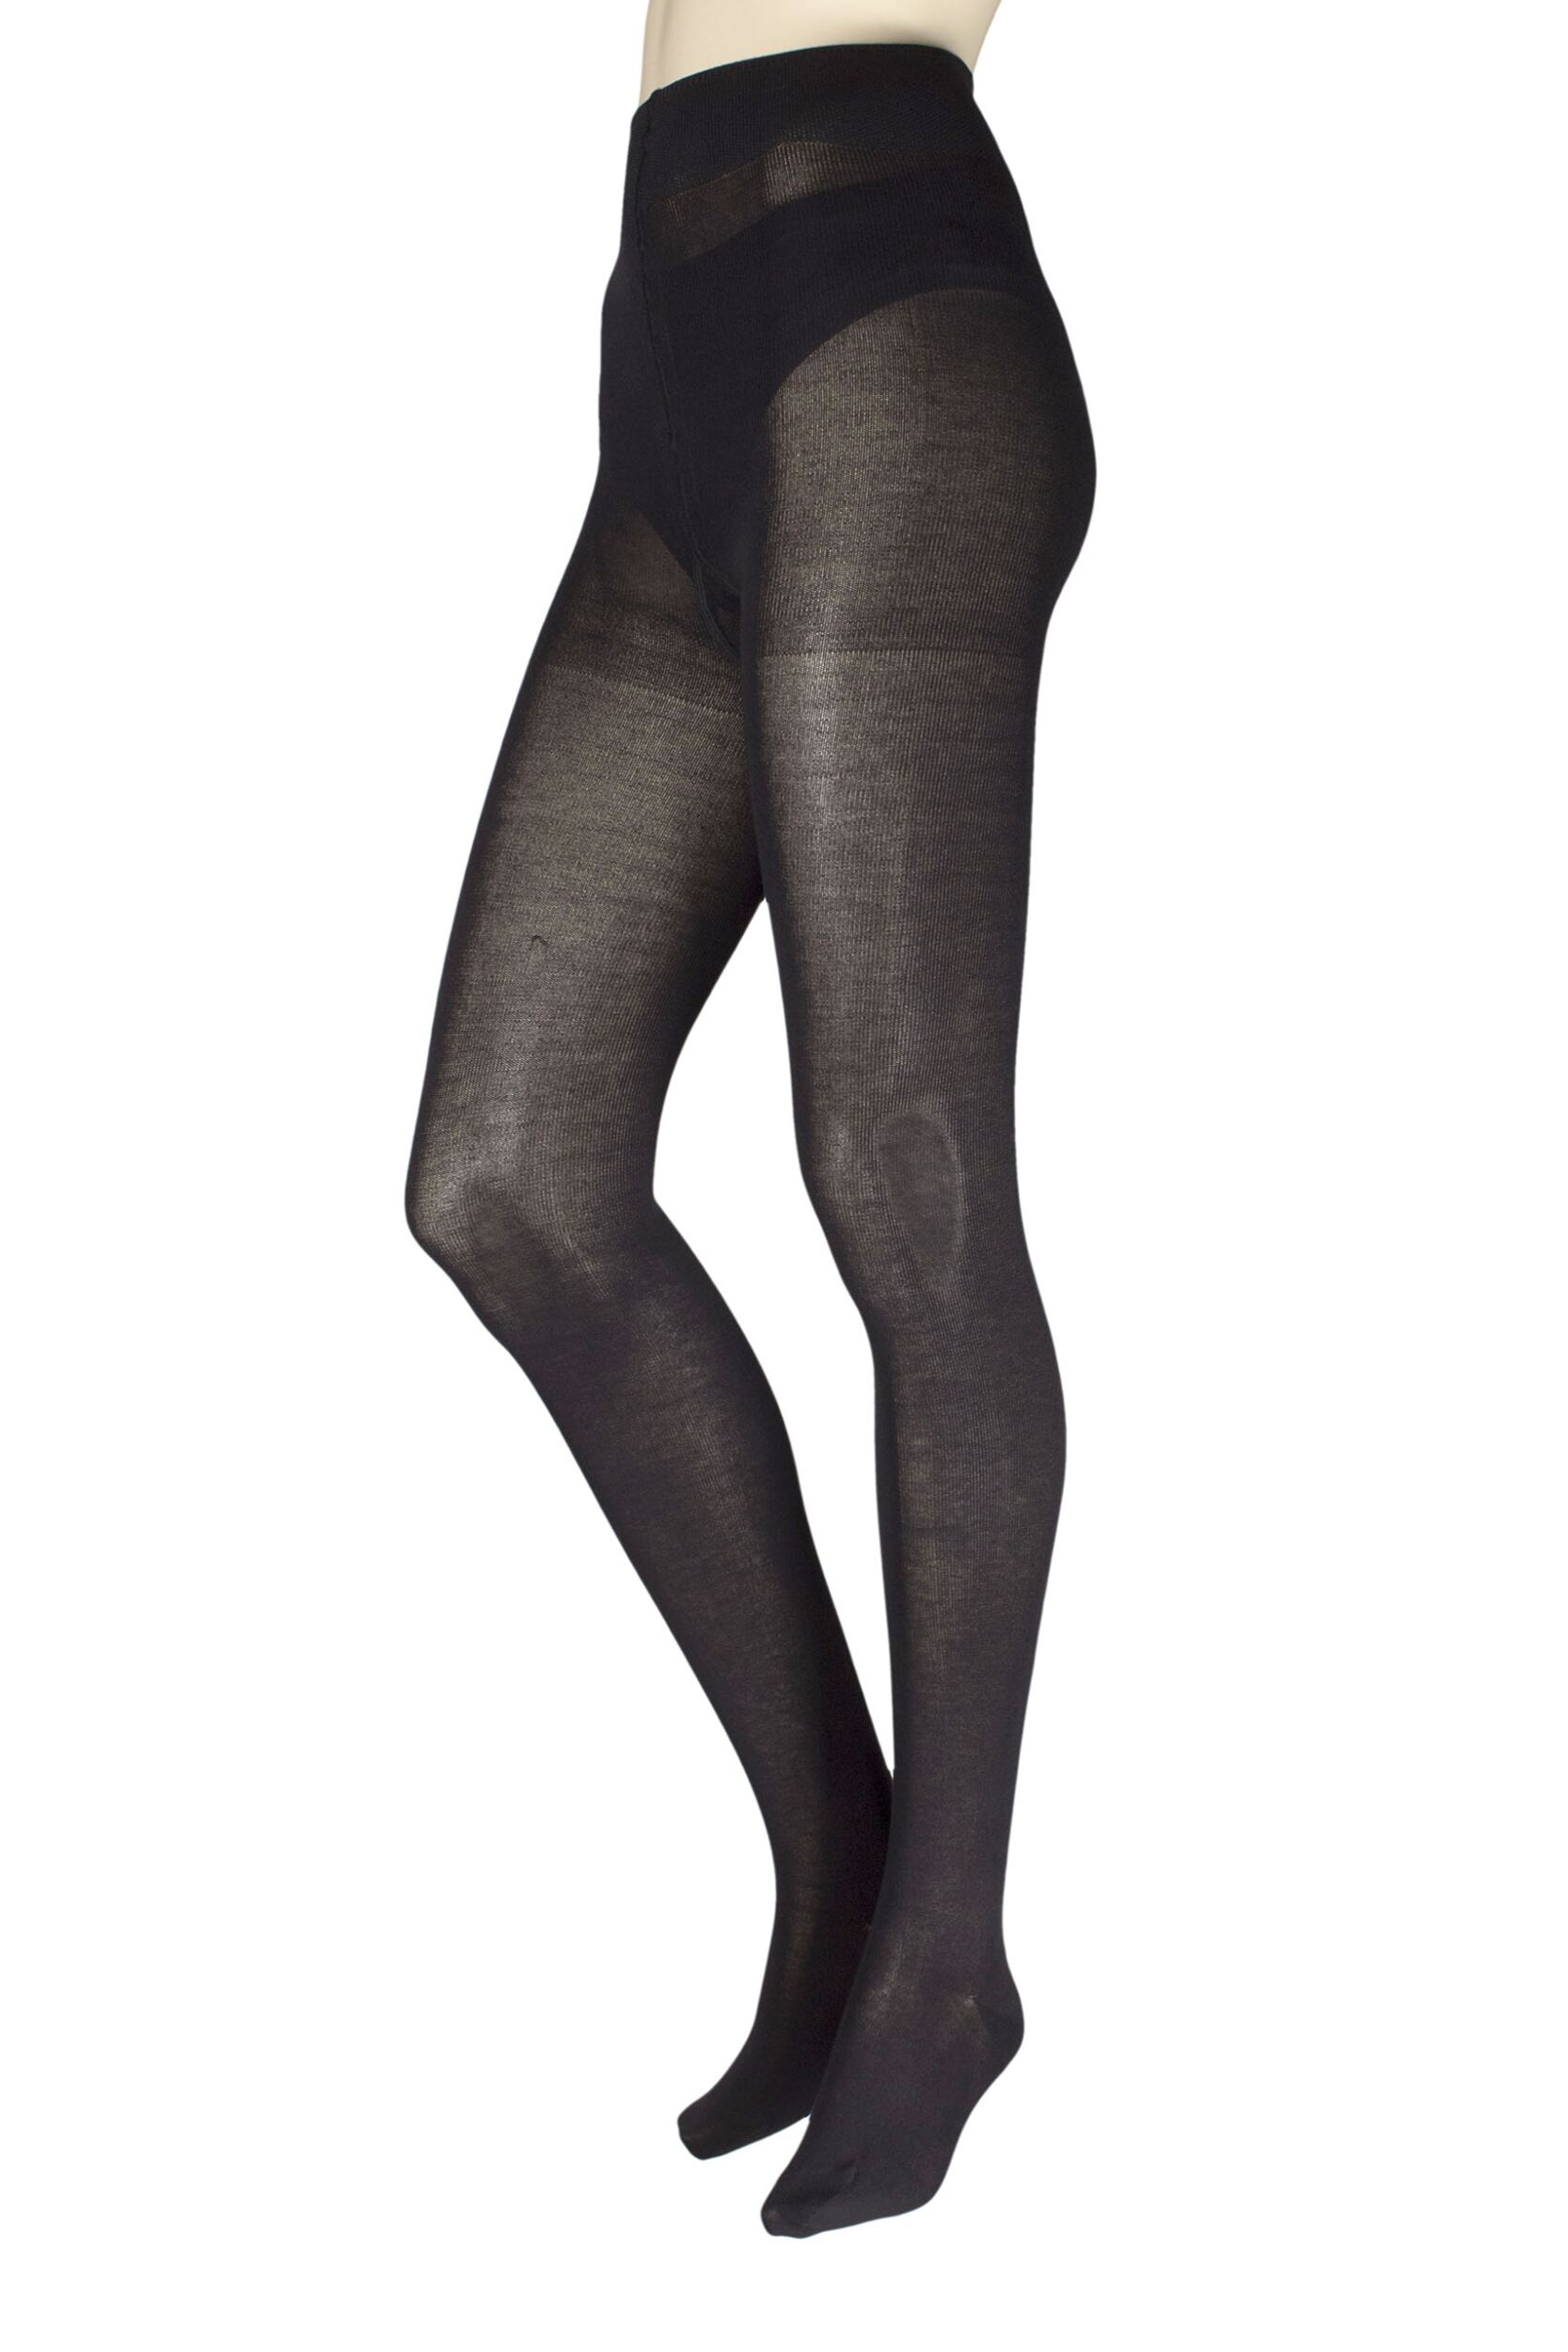 Ladies 1 Pair Falke Family Combed Cotton Tights Black Large